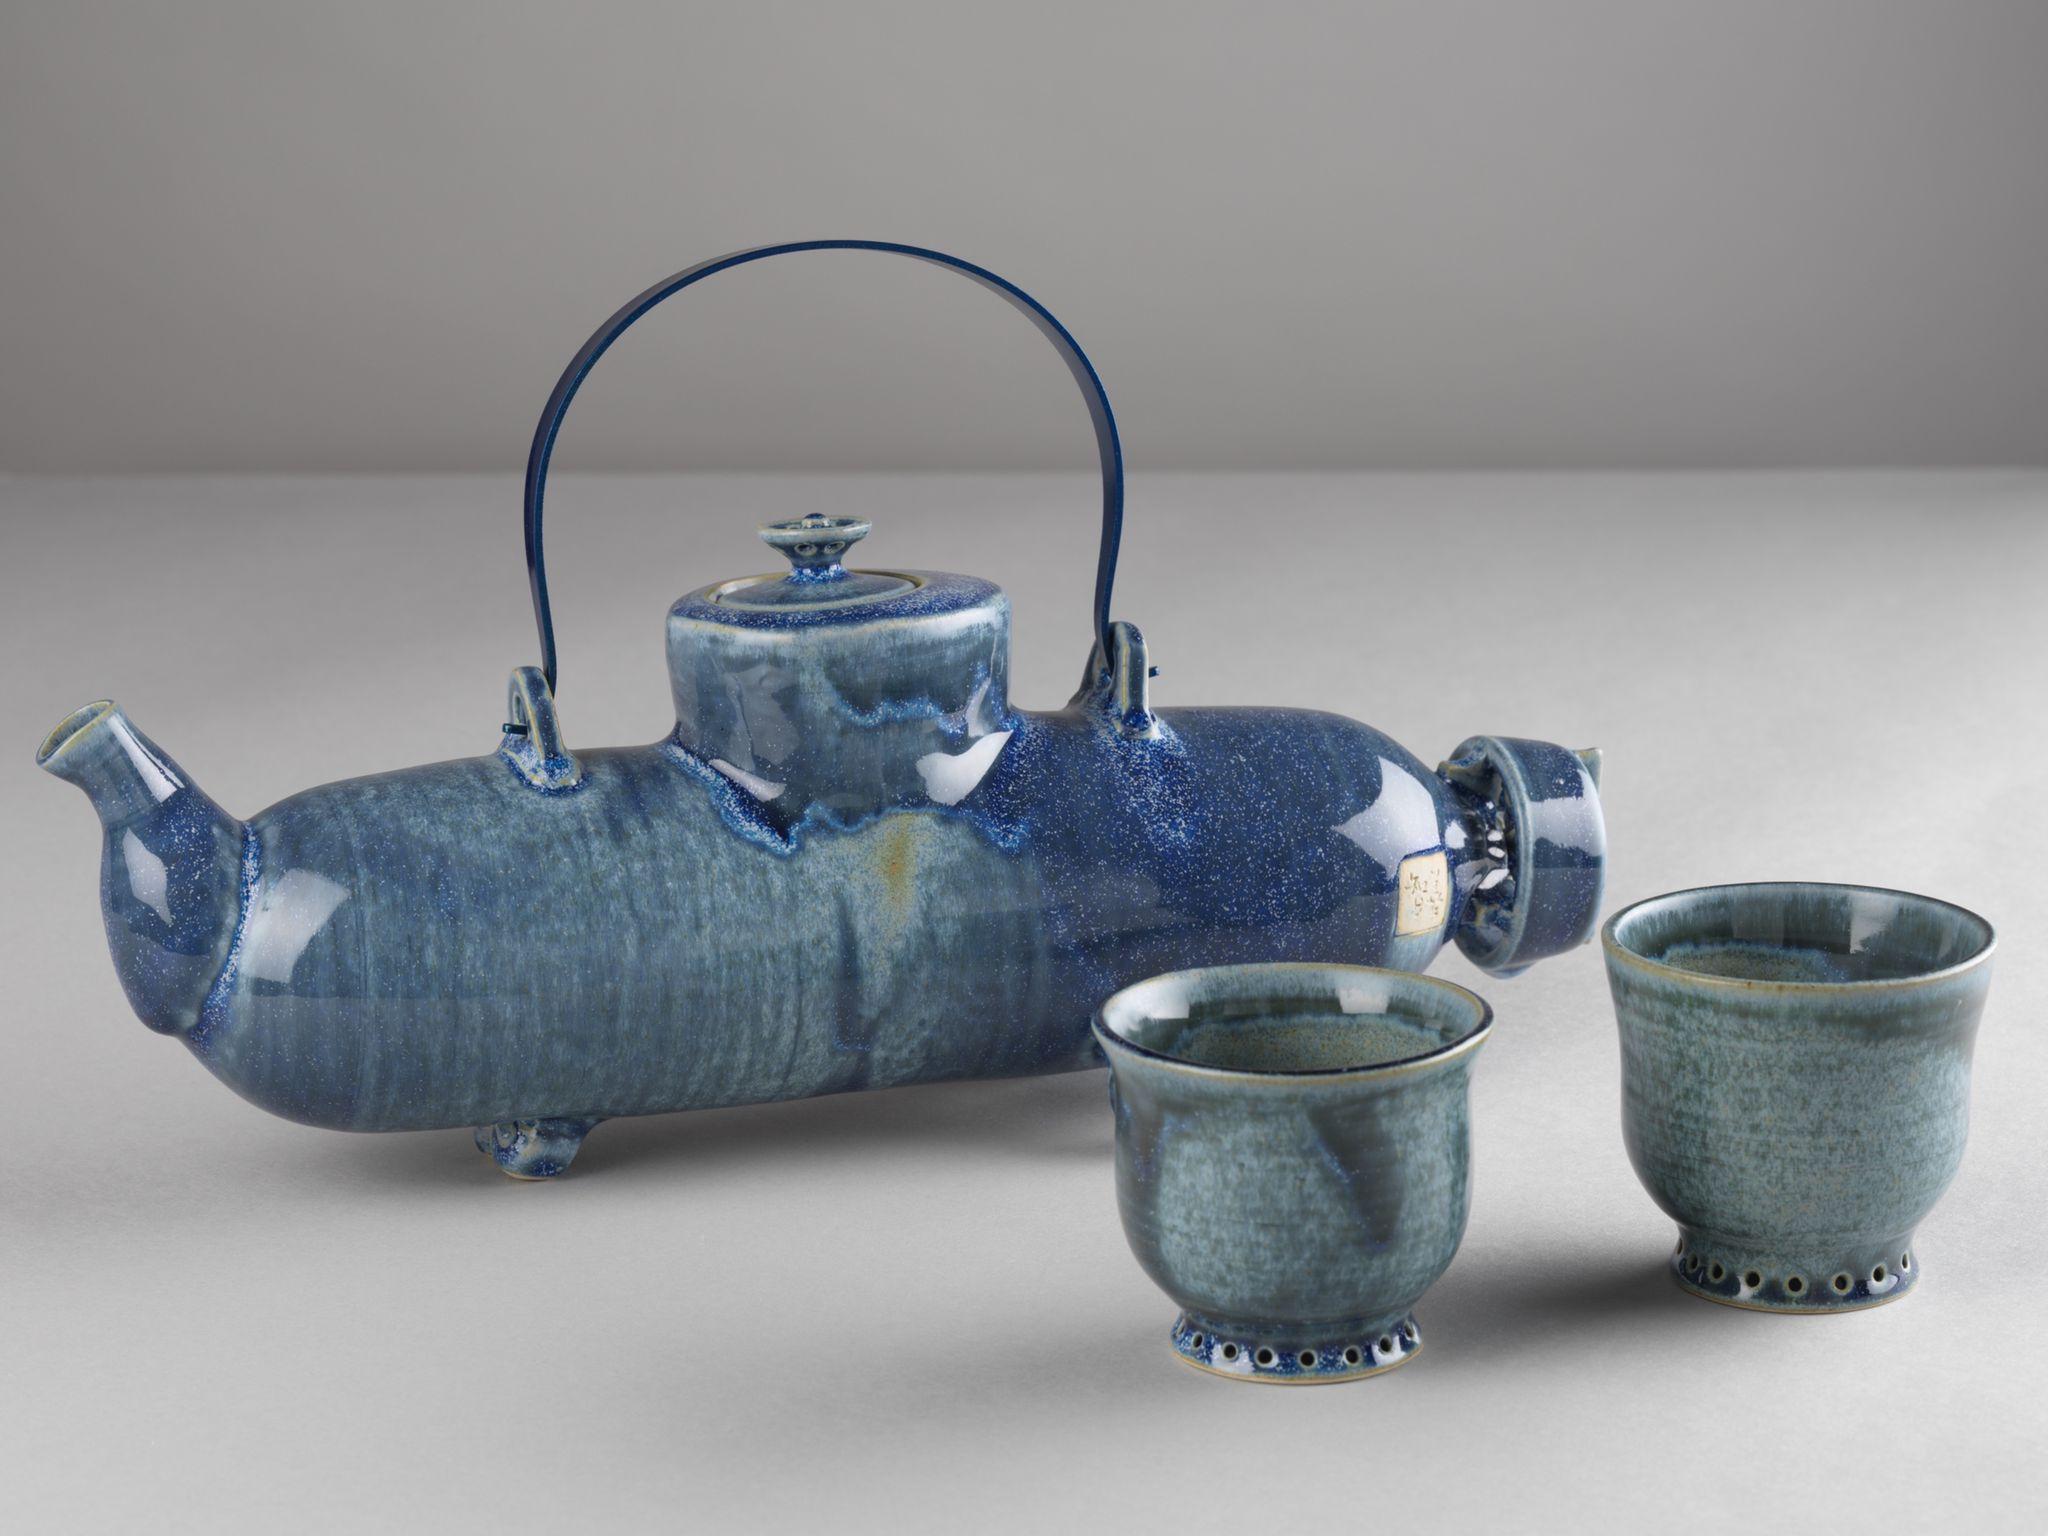 The "2021 Tea Ware by Hong Kong Potters" exhibition is being held at the Flagstaff House Museum of Tea Ware. Picture shows the Third Prize winner in the Open Category, Vitus Szeto's "Aye, Aye, Captain". 